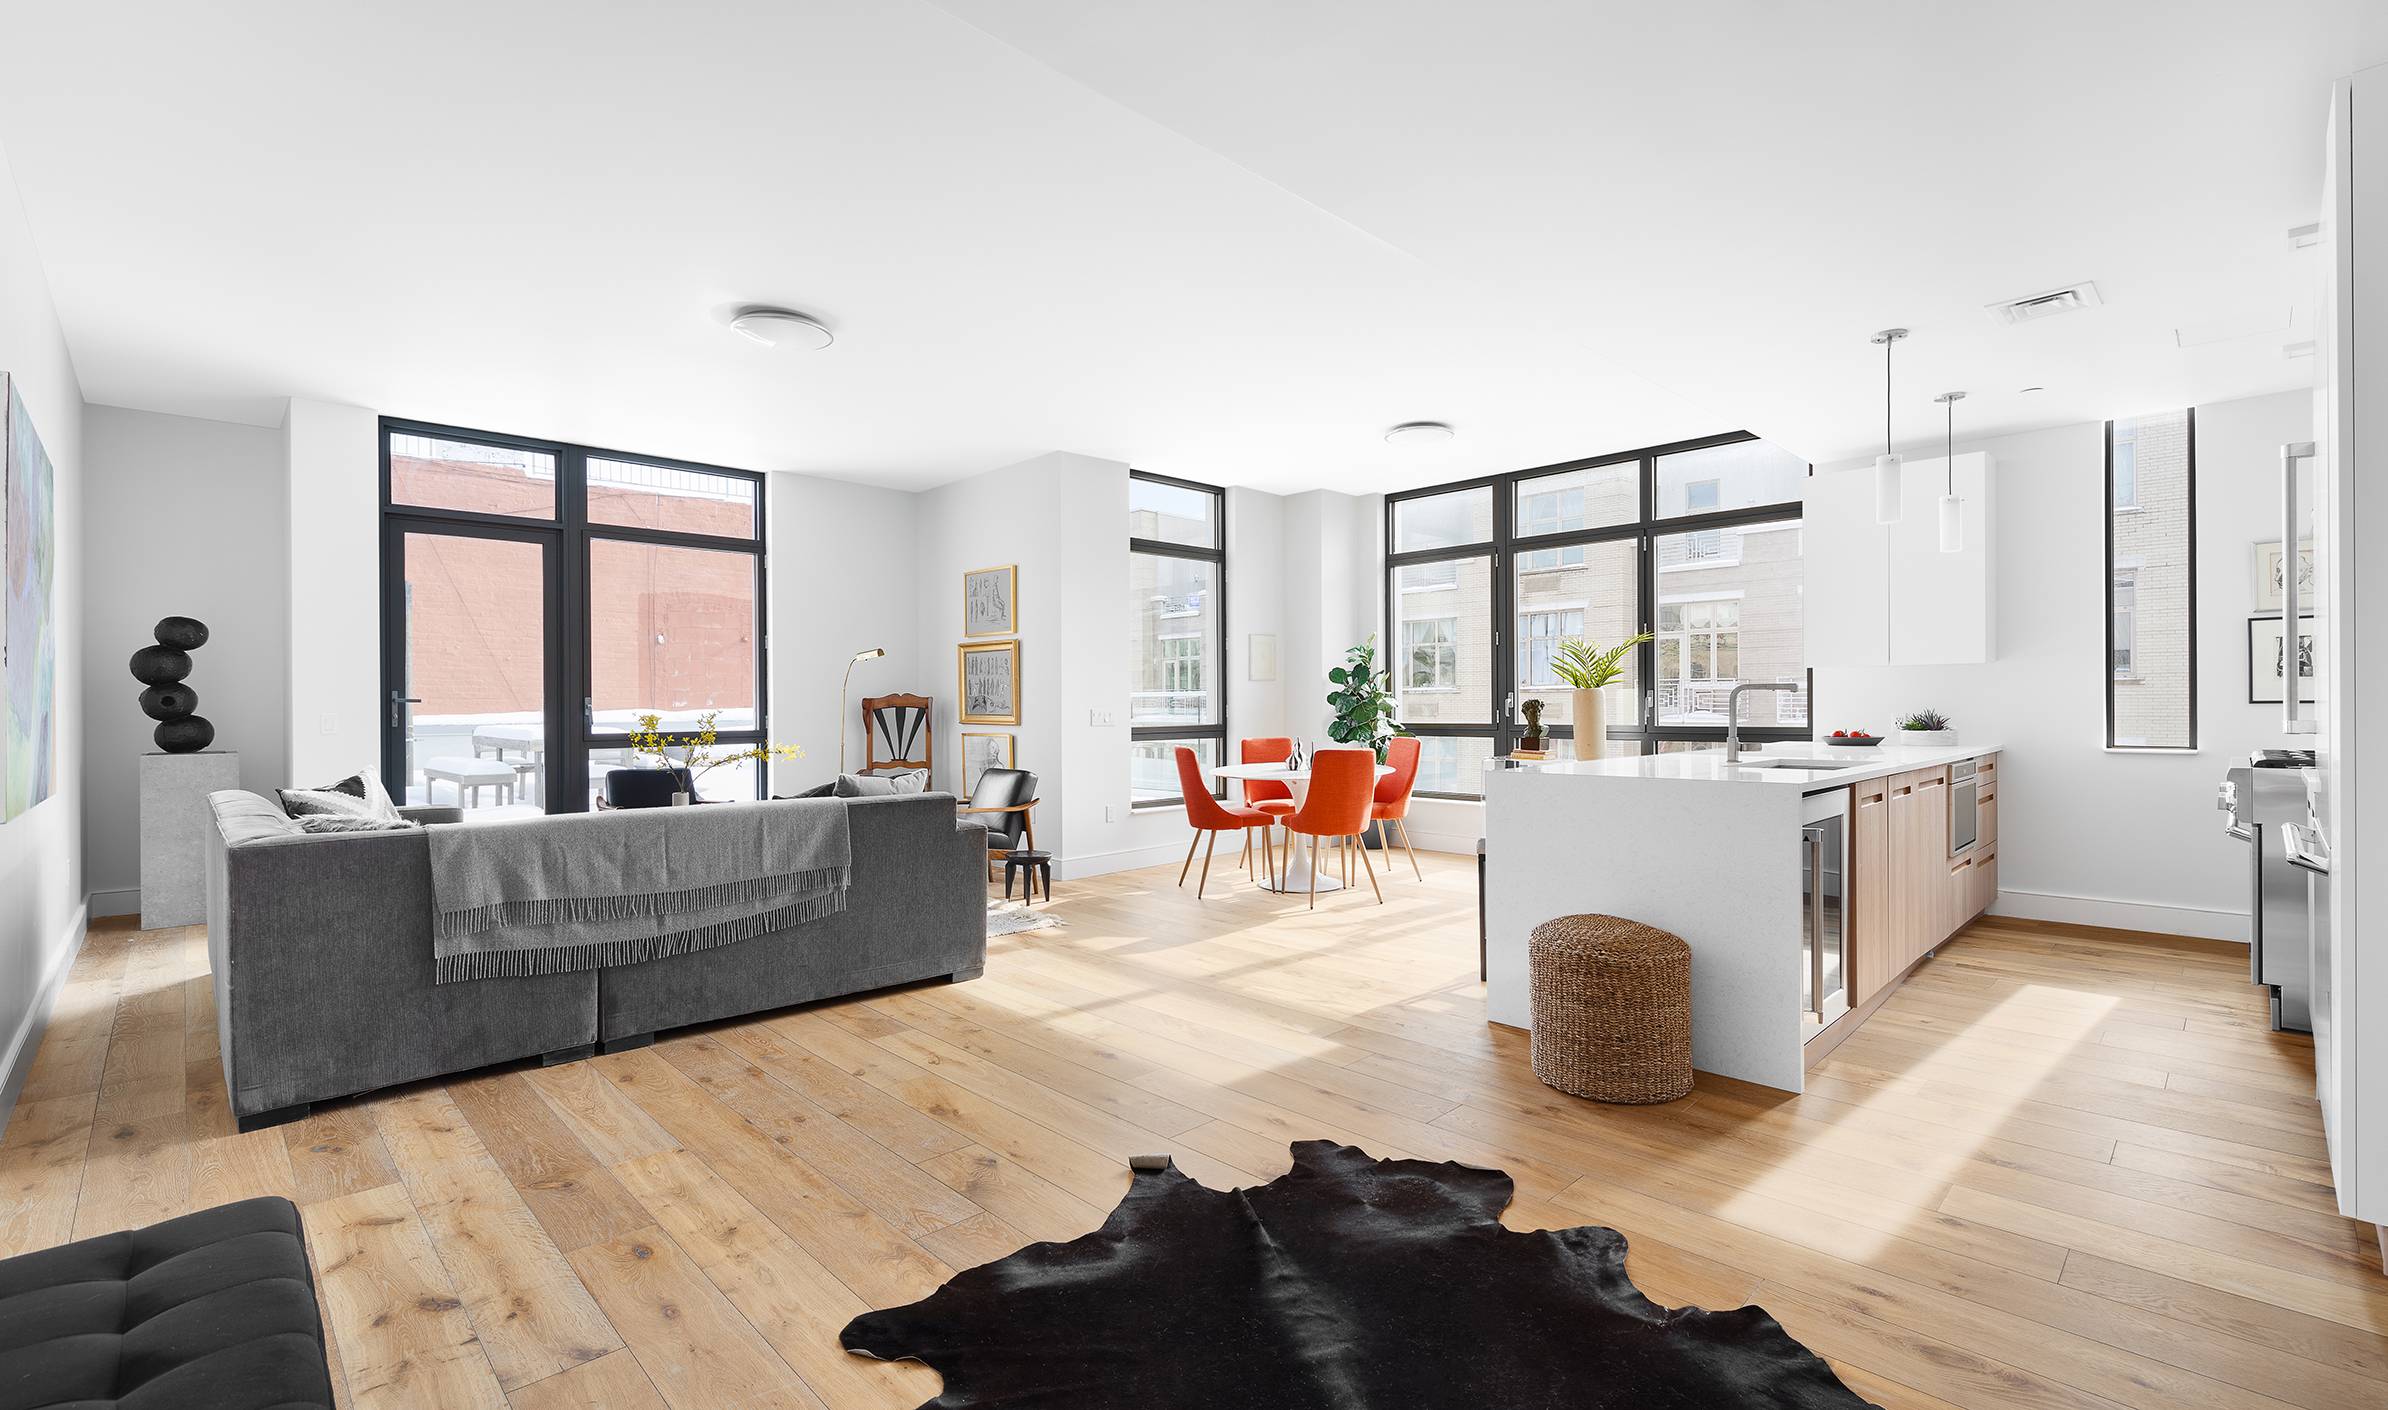 147 Hope Street is a boutique collection of new luxury condominiums located in the heart of Williamsburg.